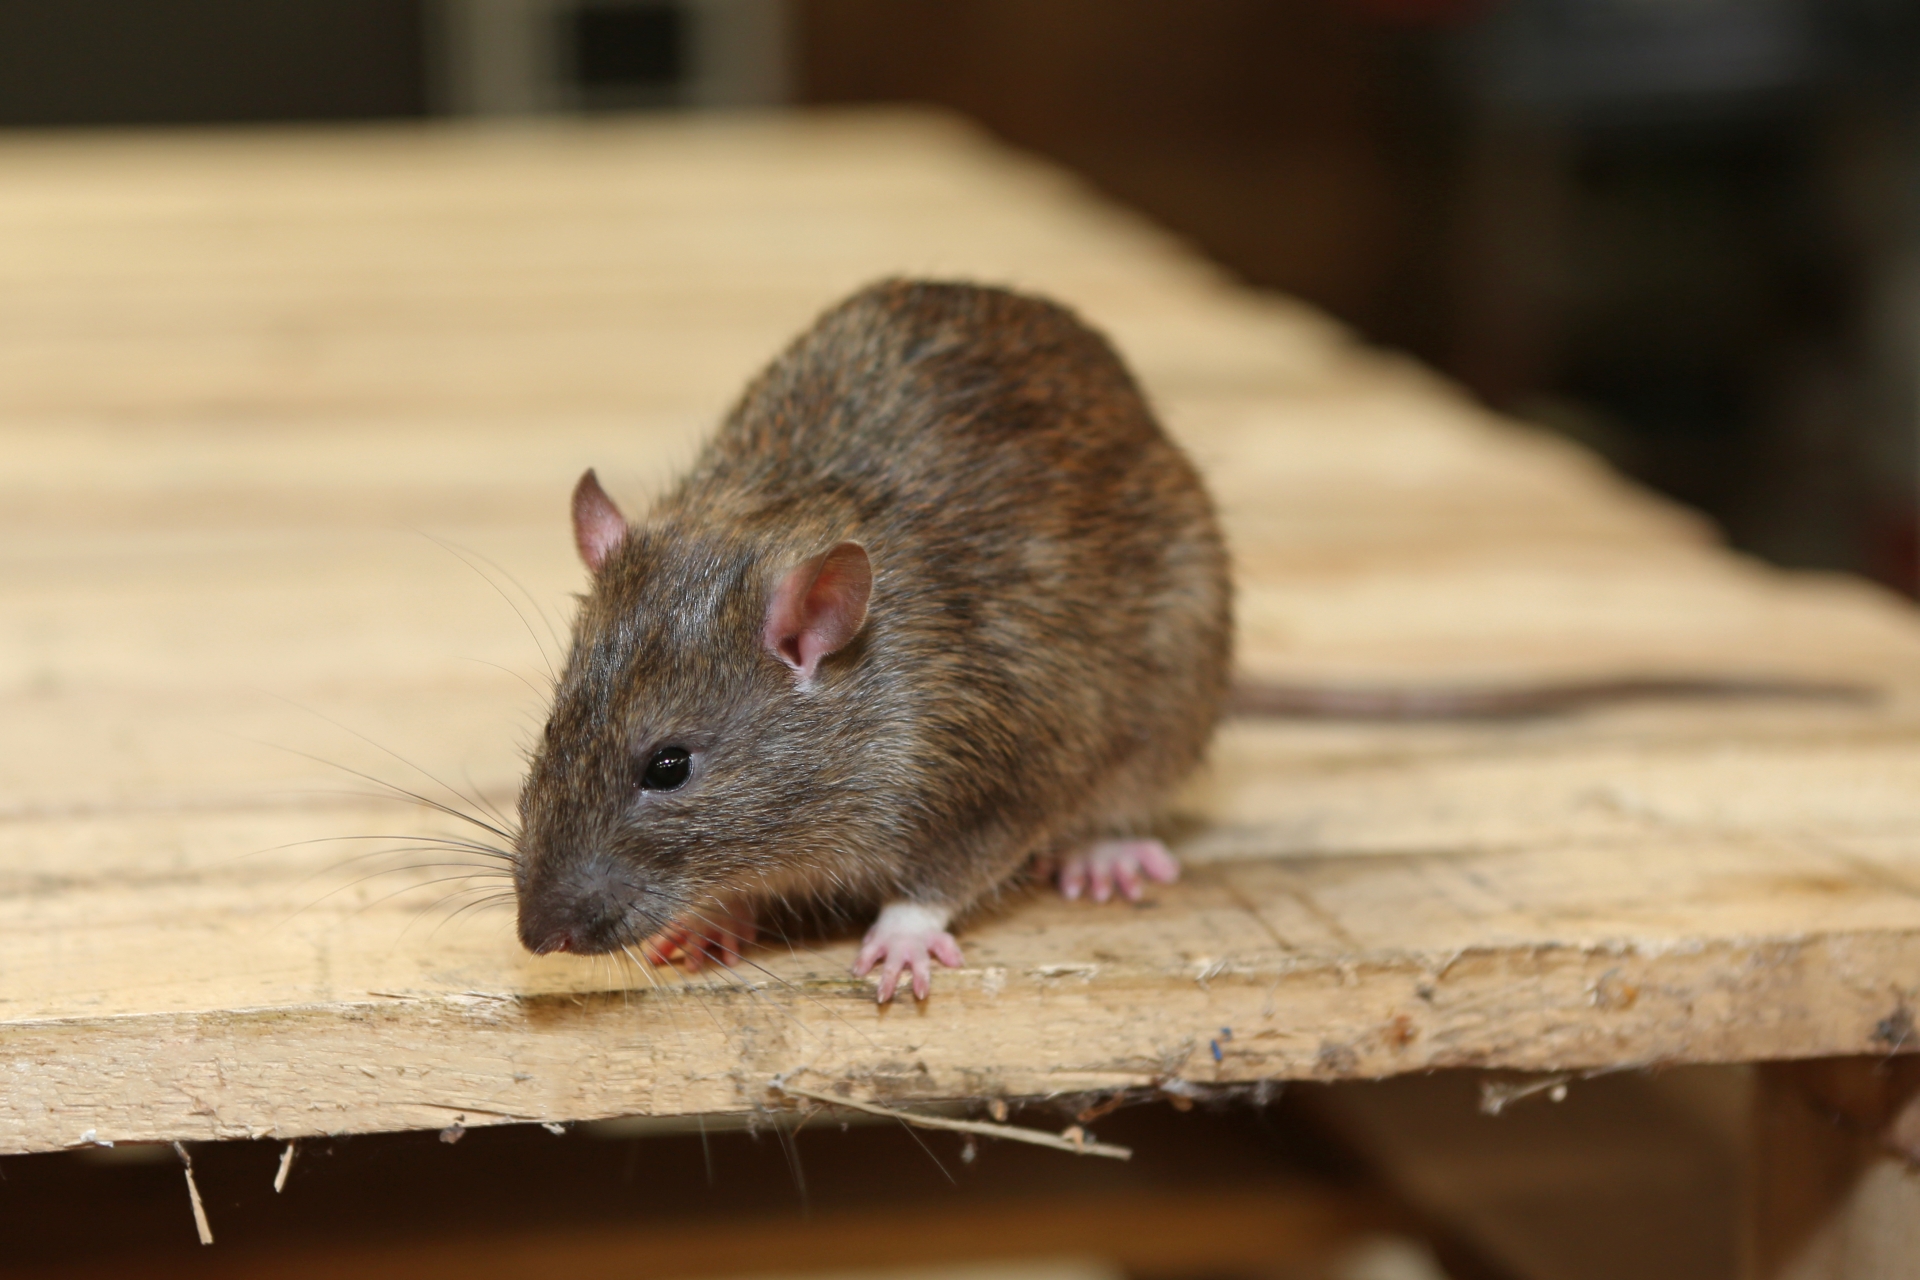 Rat extermination, Pest Control in Forest Gate, Upton Park, E7. Call Now 020 8166 9746